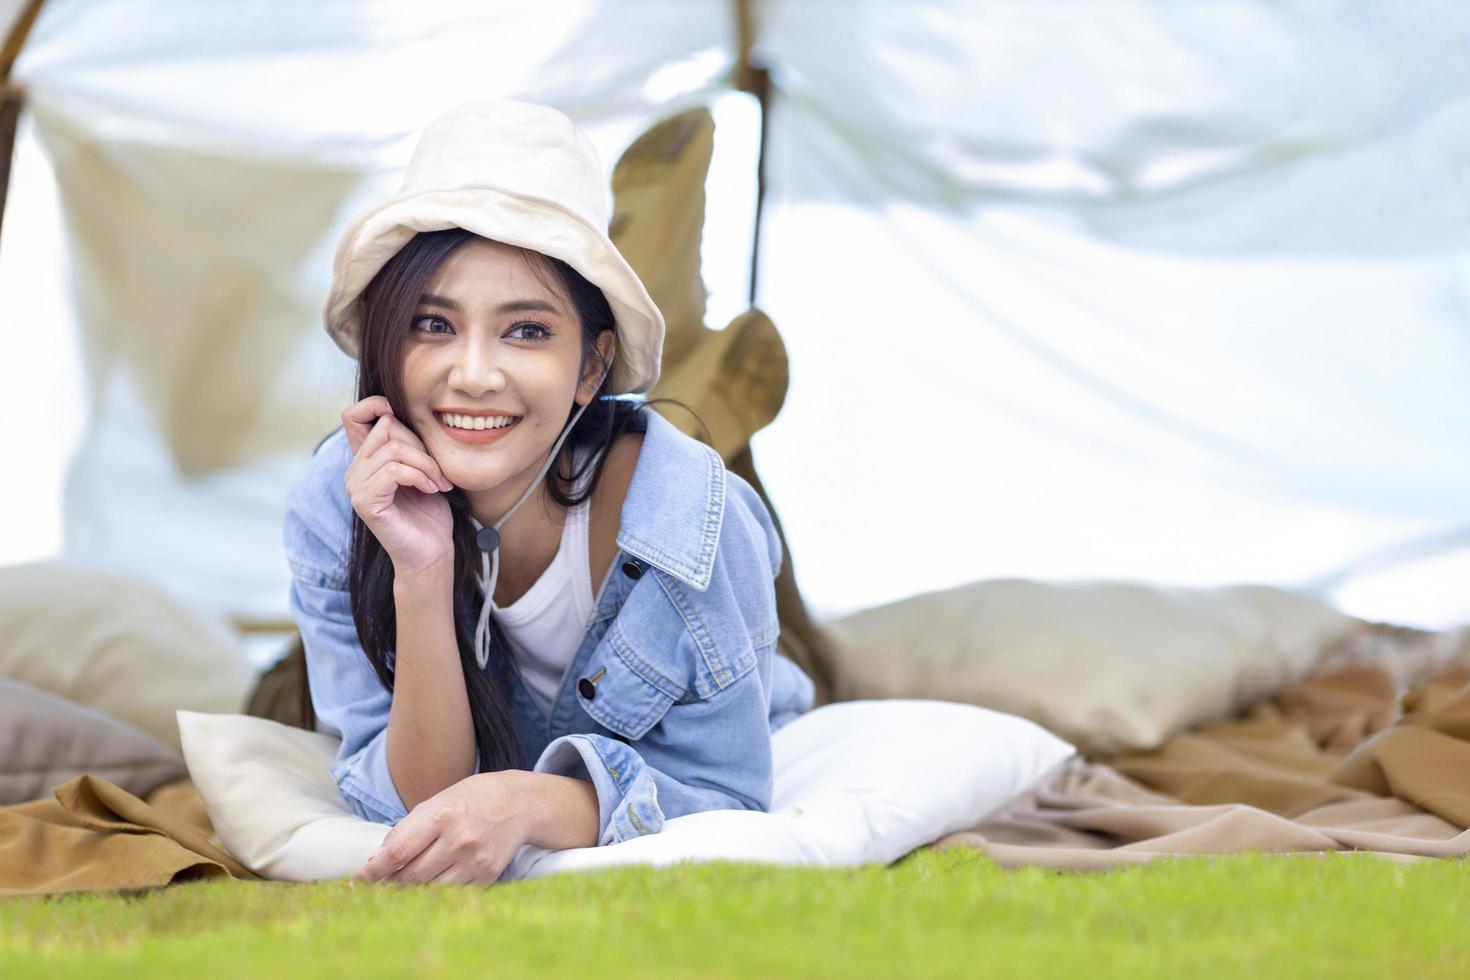 Asian woman is staying inside her tent while camping outdoor during summer time in national park for adventure and active travel concept photo